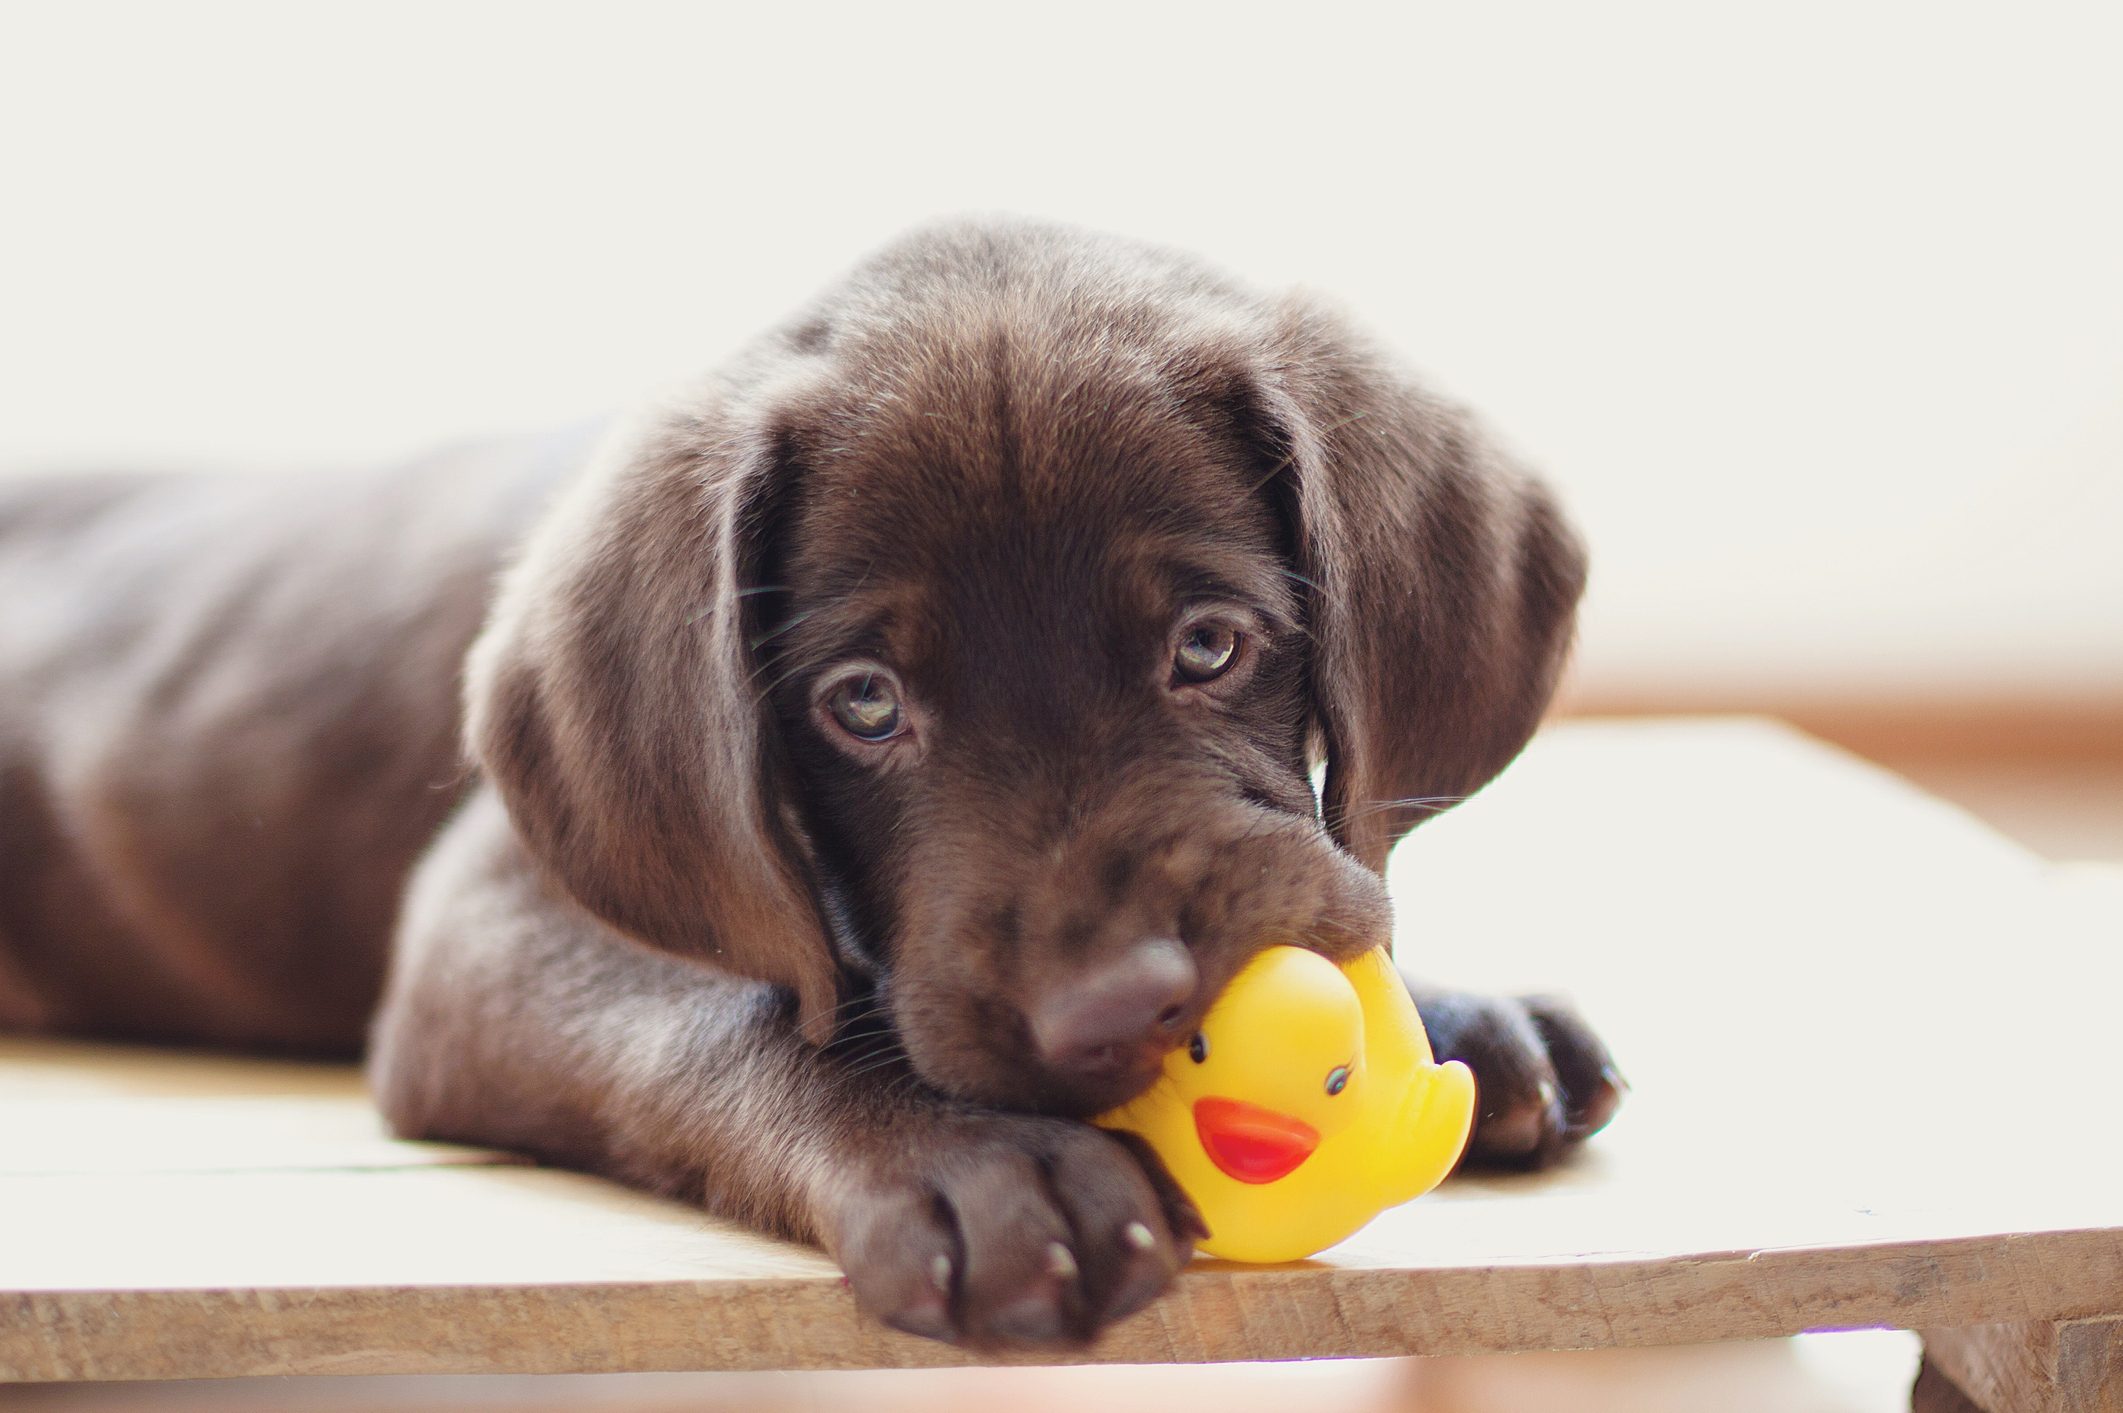 Does Your Dog Destroy His Toys? - DOG PARTNERS